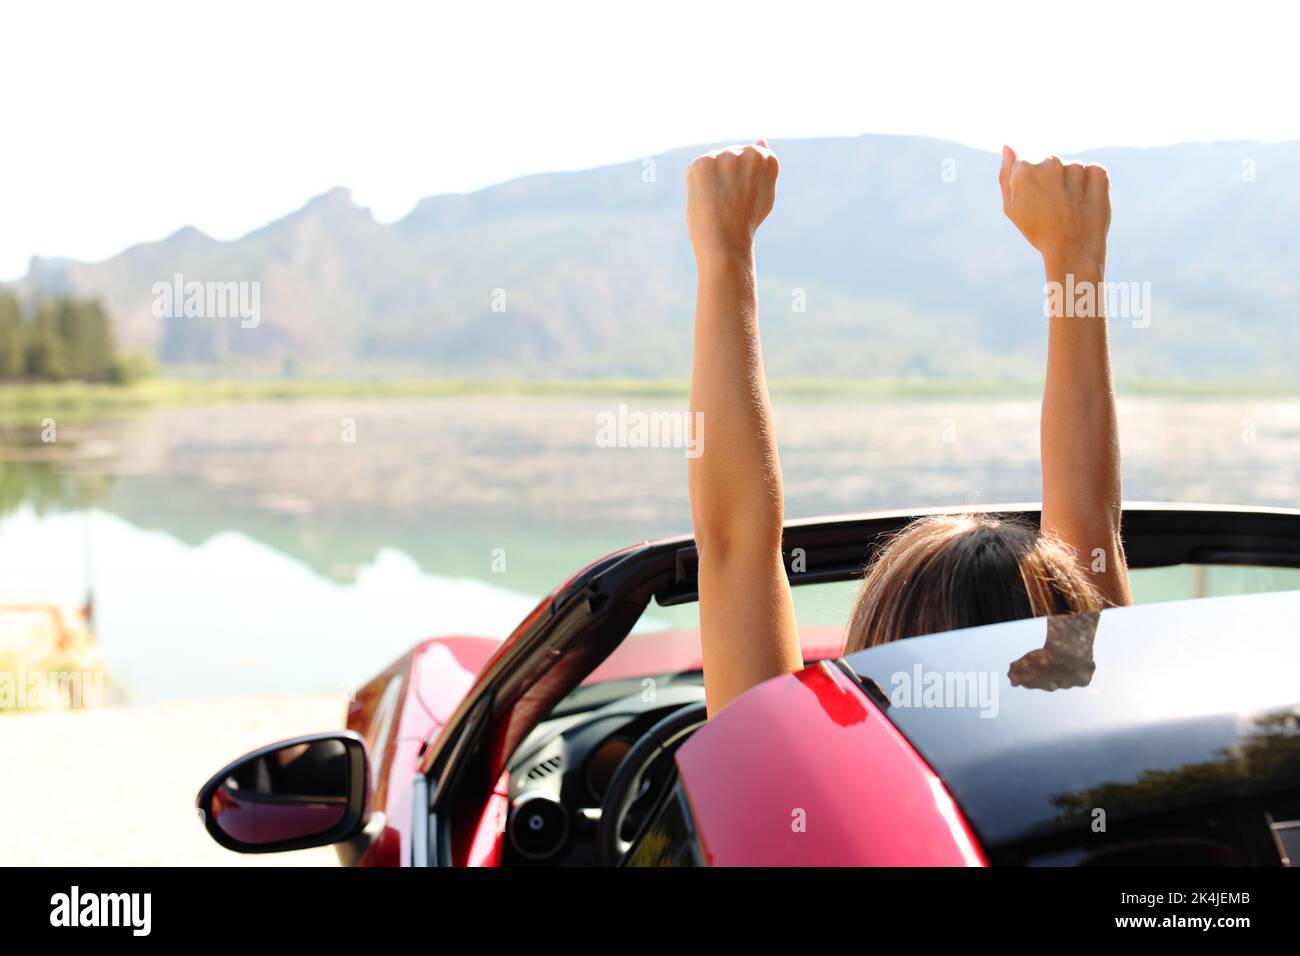 Back view portrait of a driver celebrating rsising arms in a convertible car Stock Photo